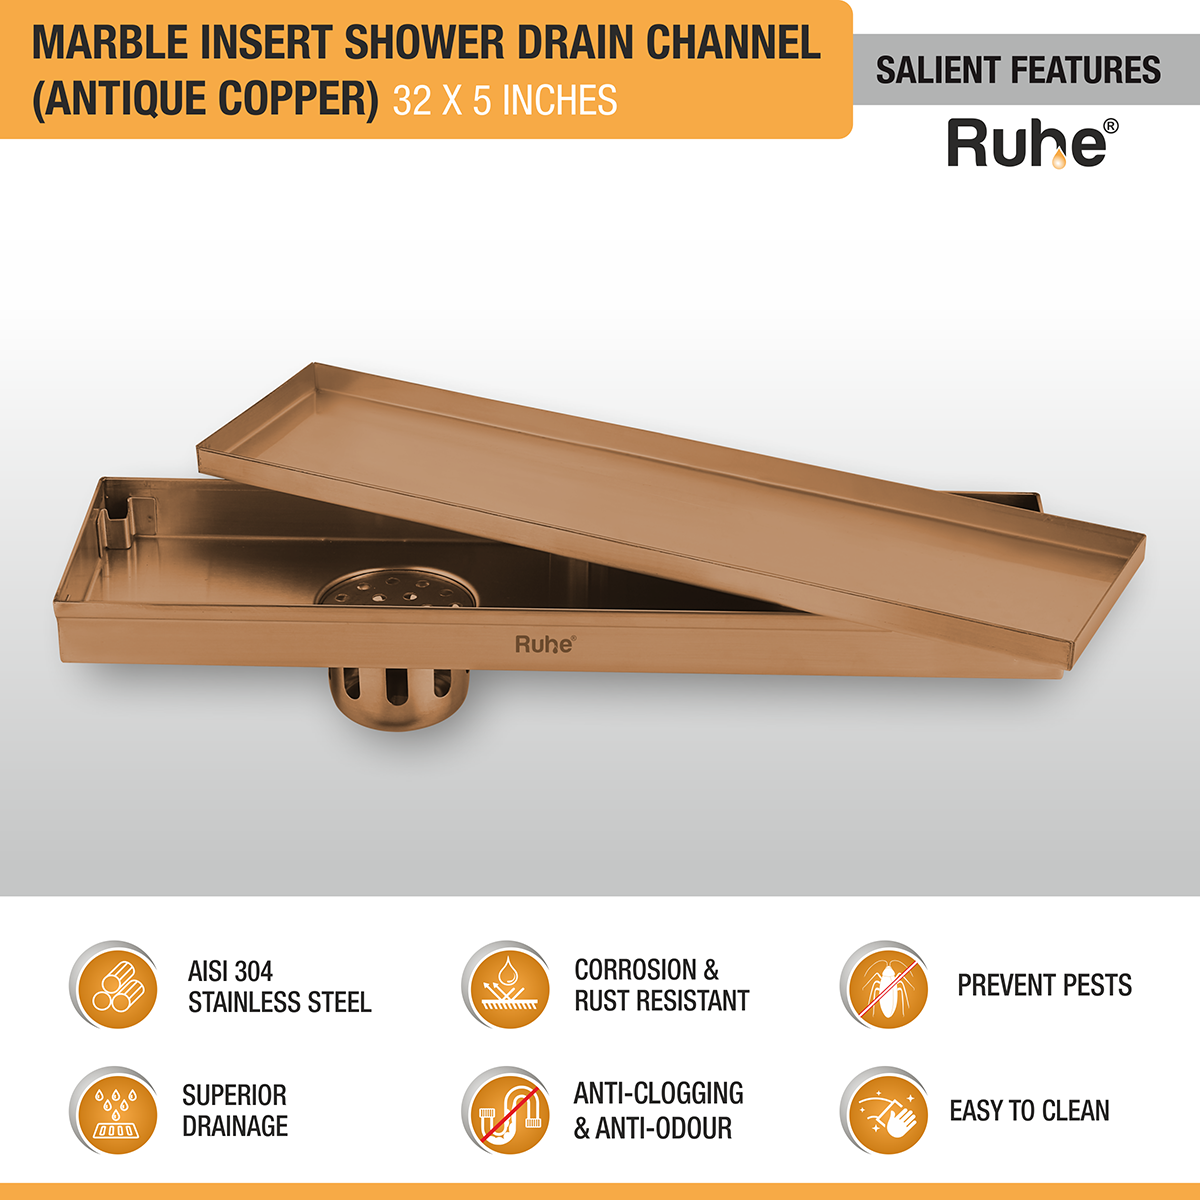 Marble Insert Shower Drain Channel (32 x 5 Inches) ROSE GOLD PVD Coated features and benefits